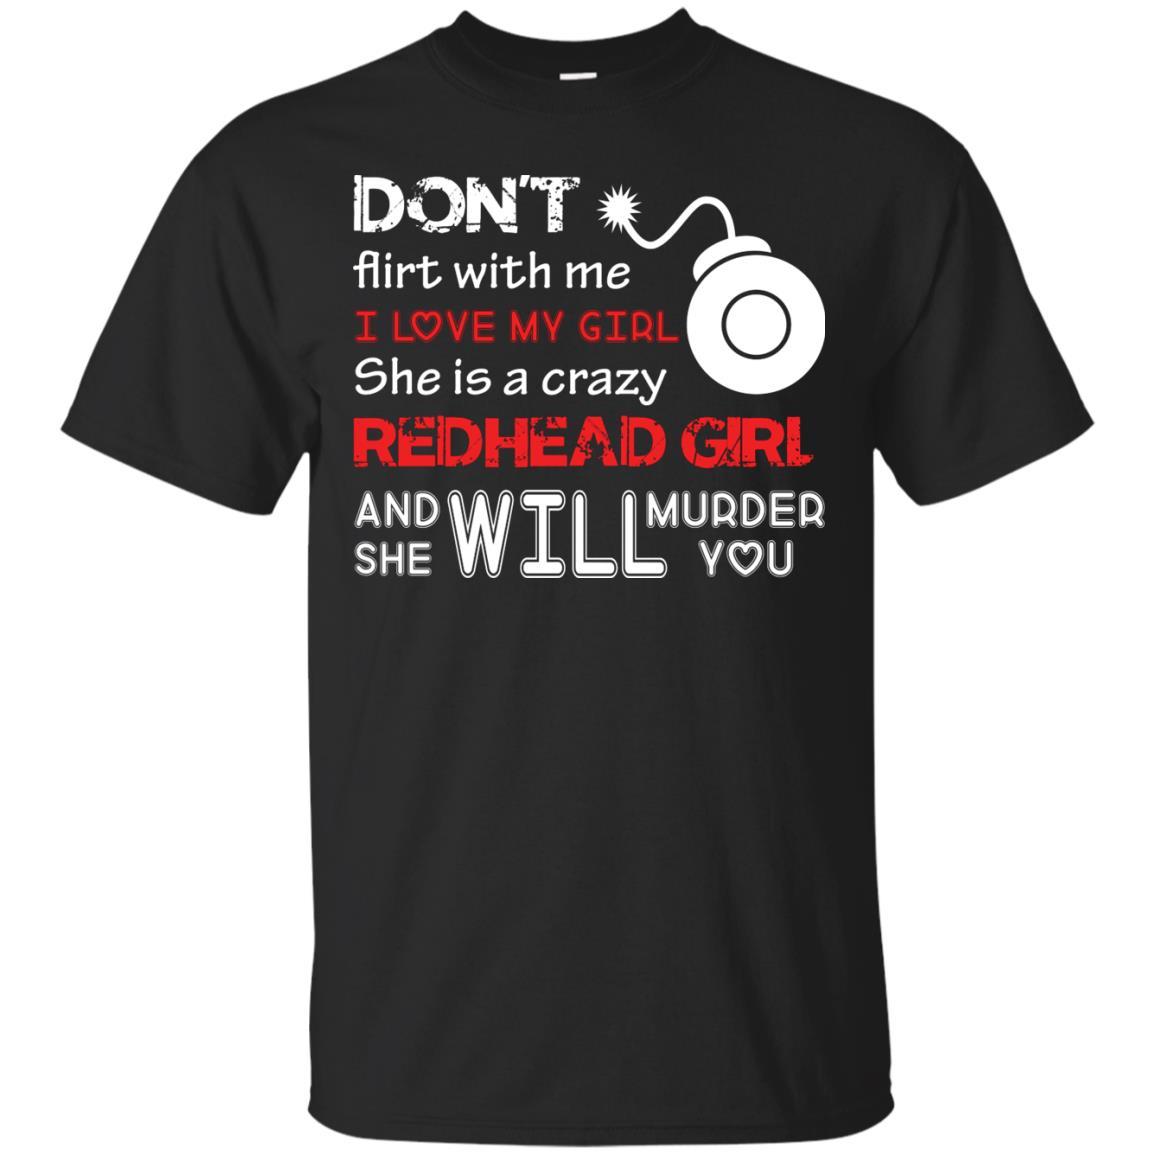 Redhead Girl T-shirt Don't Flirt With Me I Love My Girl She Is A Crazy Redhead Girl